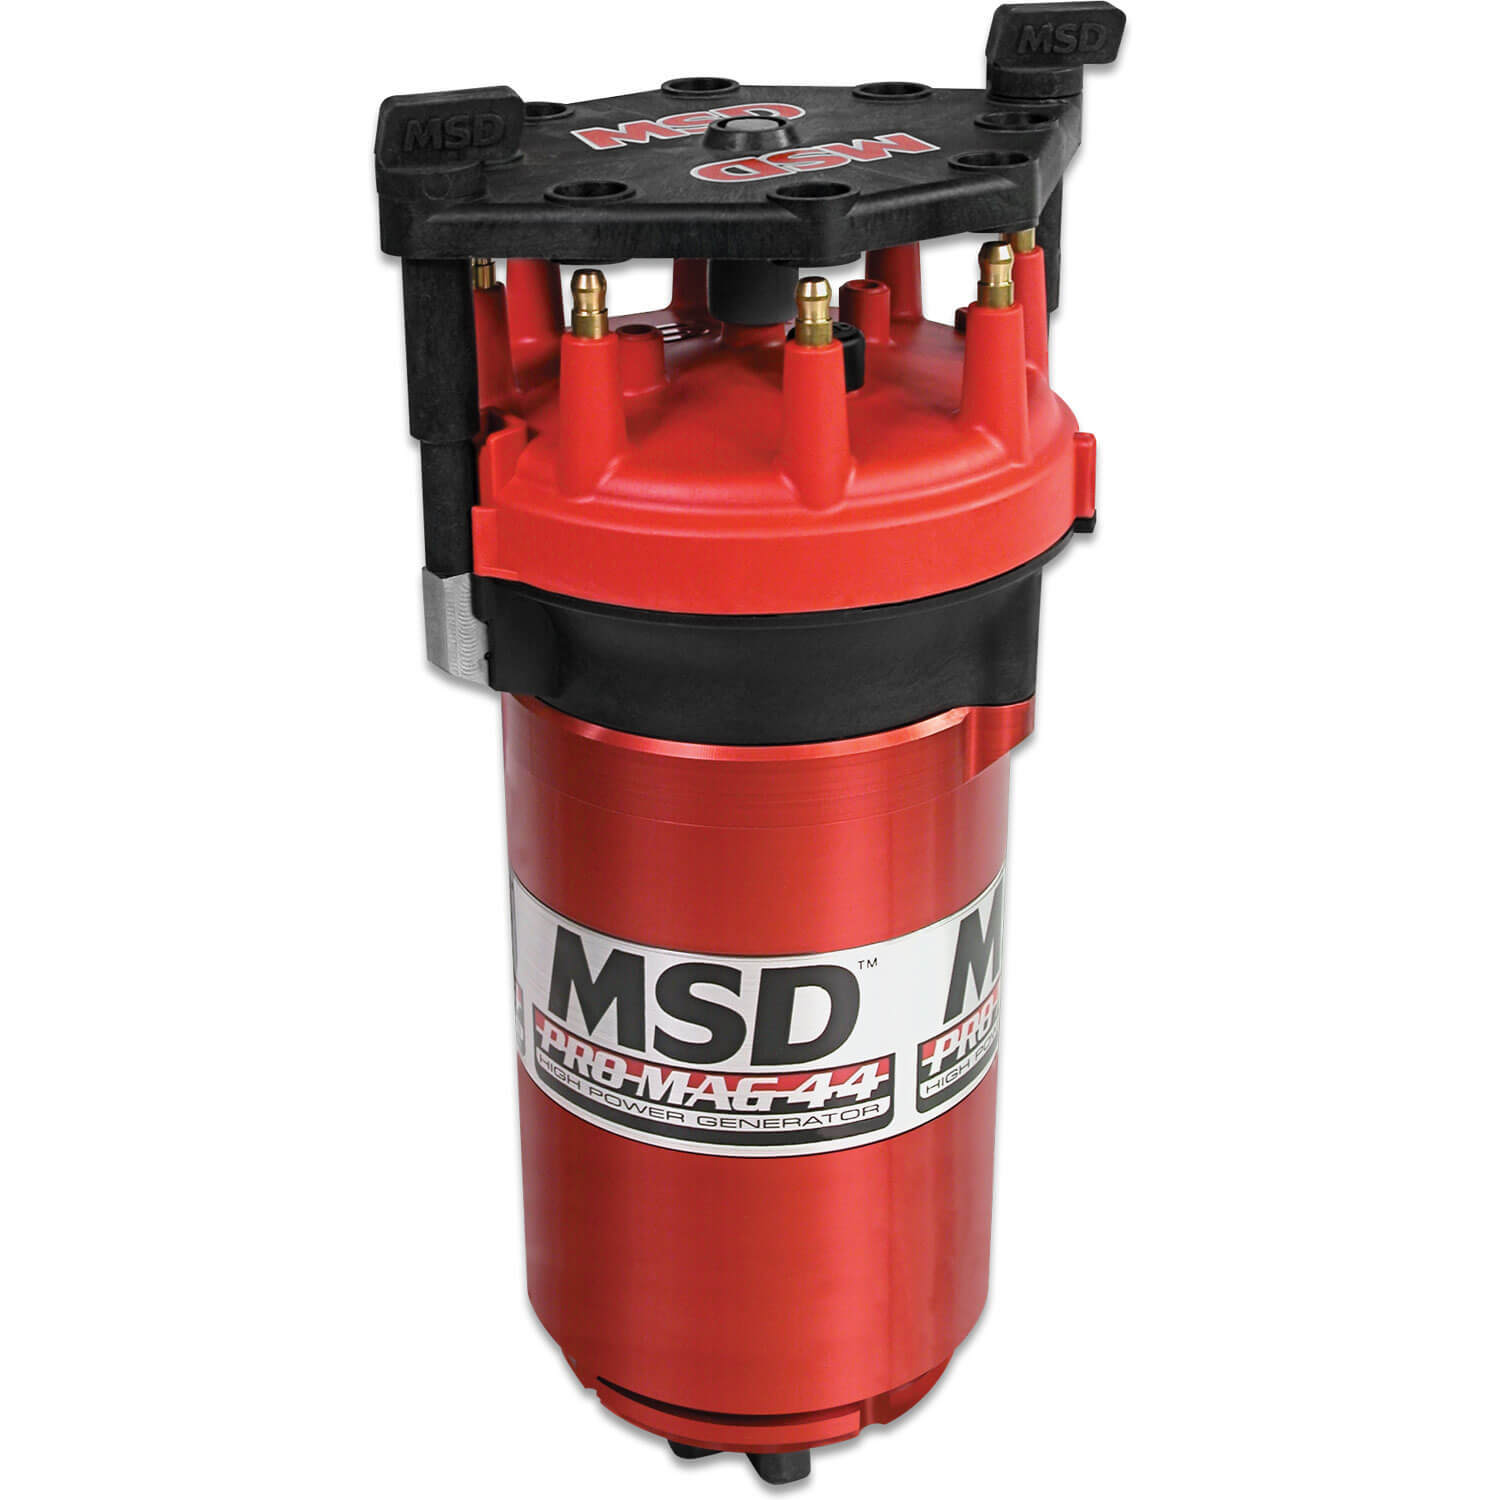 MSD Ignition 8130 Ignition Magneto, Pro Mag 44, Magnetic Pickup, 26 Degree Spark Duration, 50000V, HEI Style Terminal, Red, Clockwise, Universal, Each